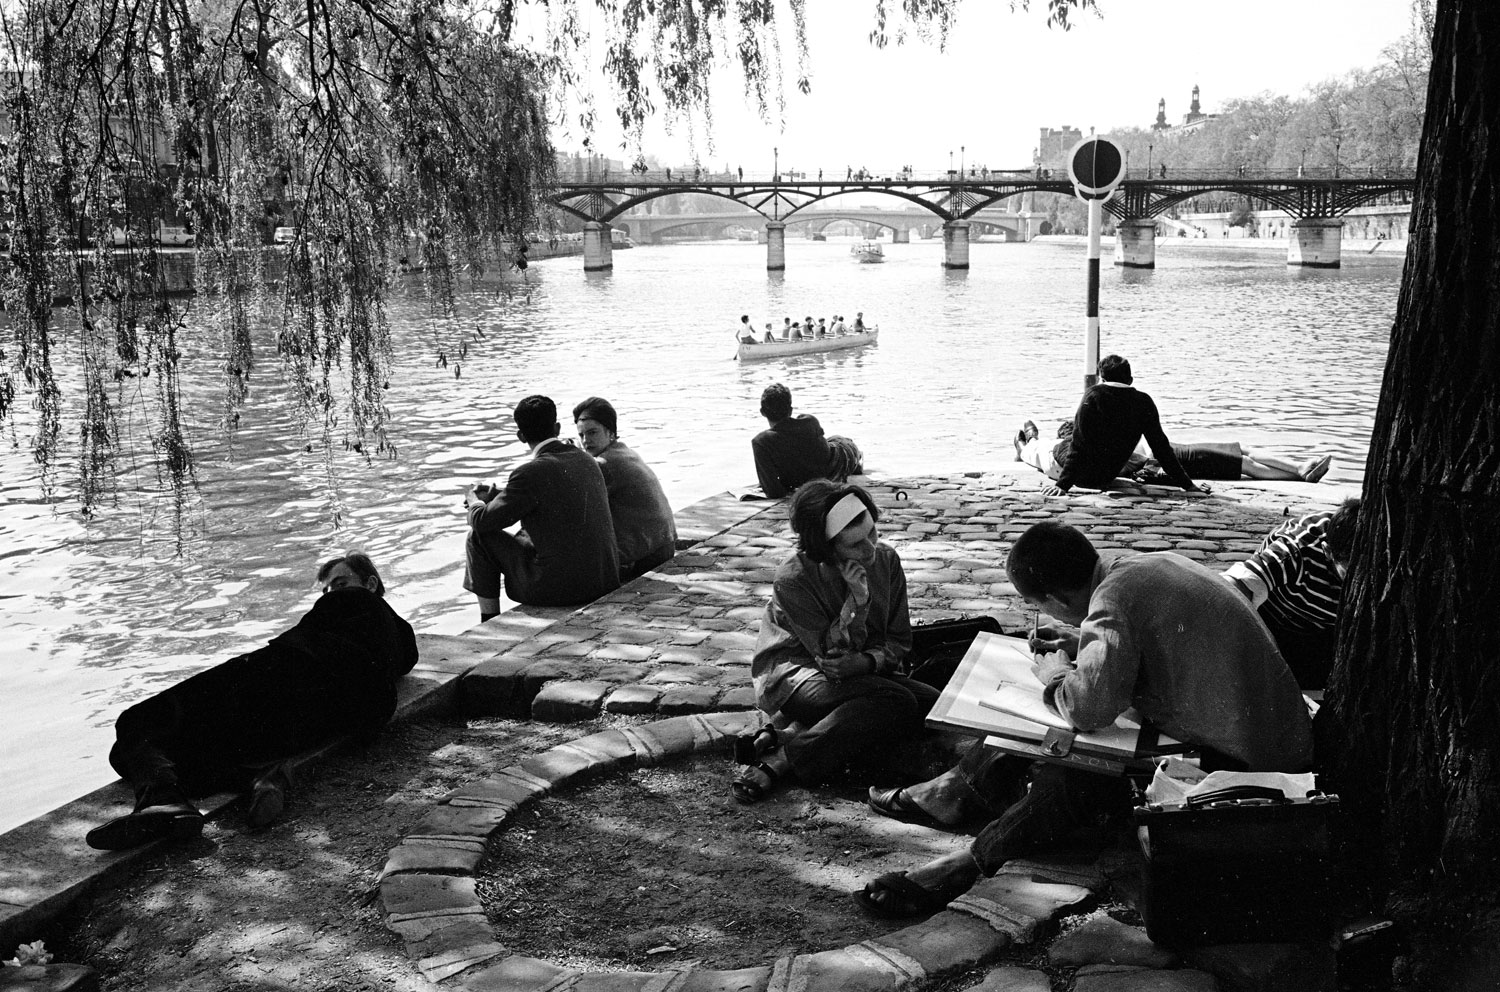 People enjoying an afternoon on the banks of the Seine River, 1963.